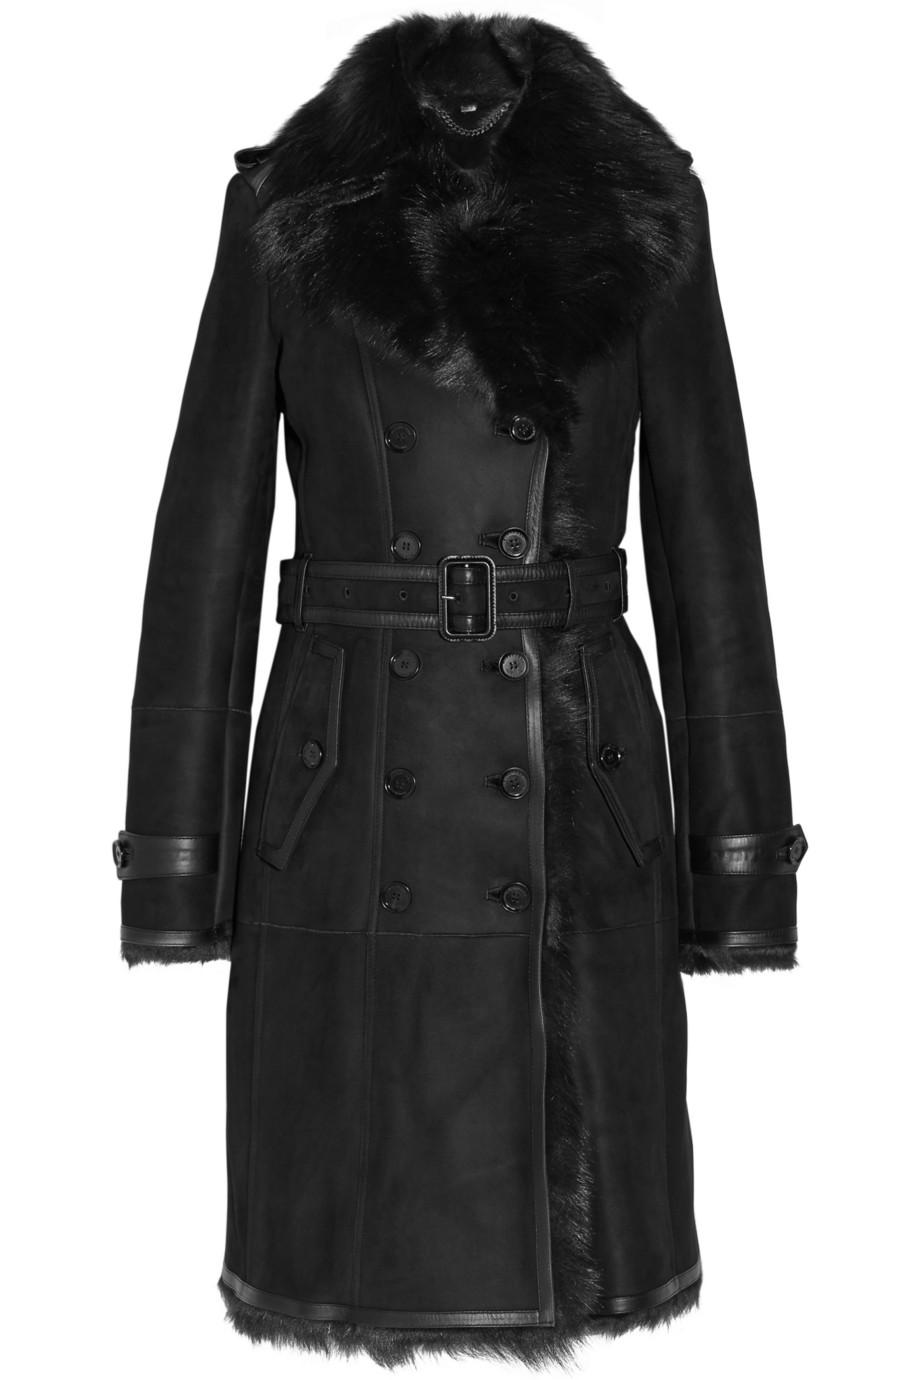 Lyst - Burberry Belted Shearling Coat in Black